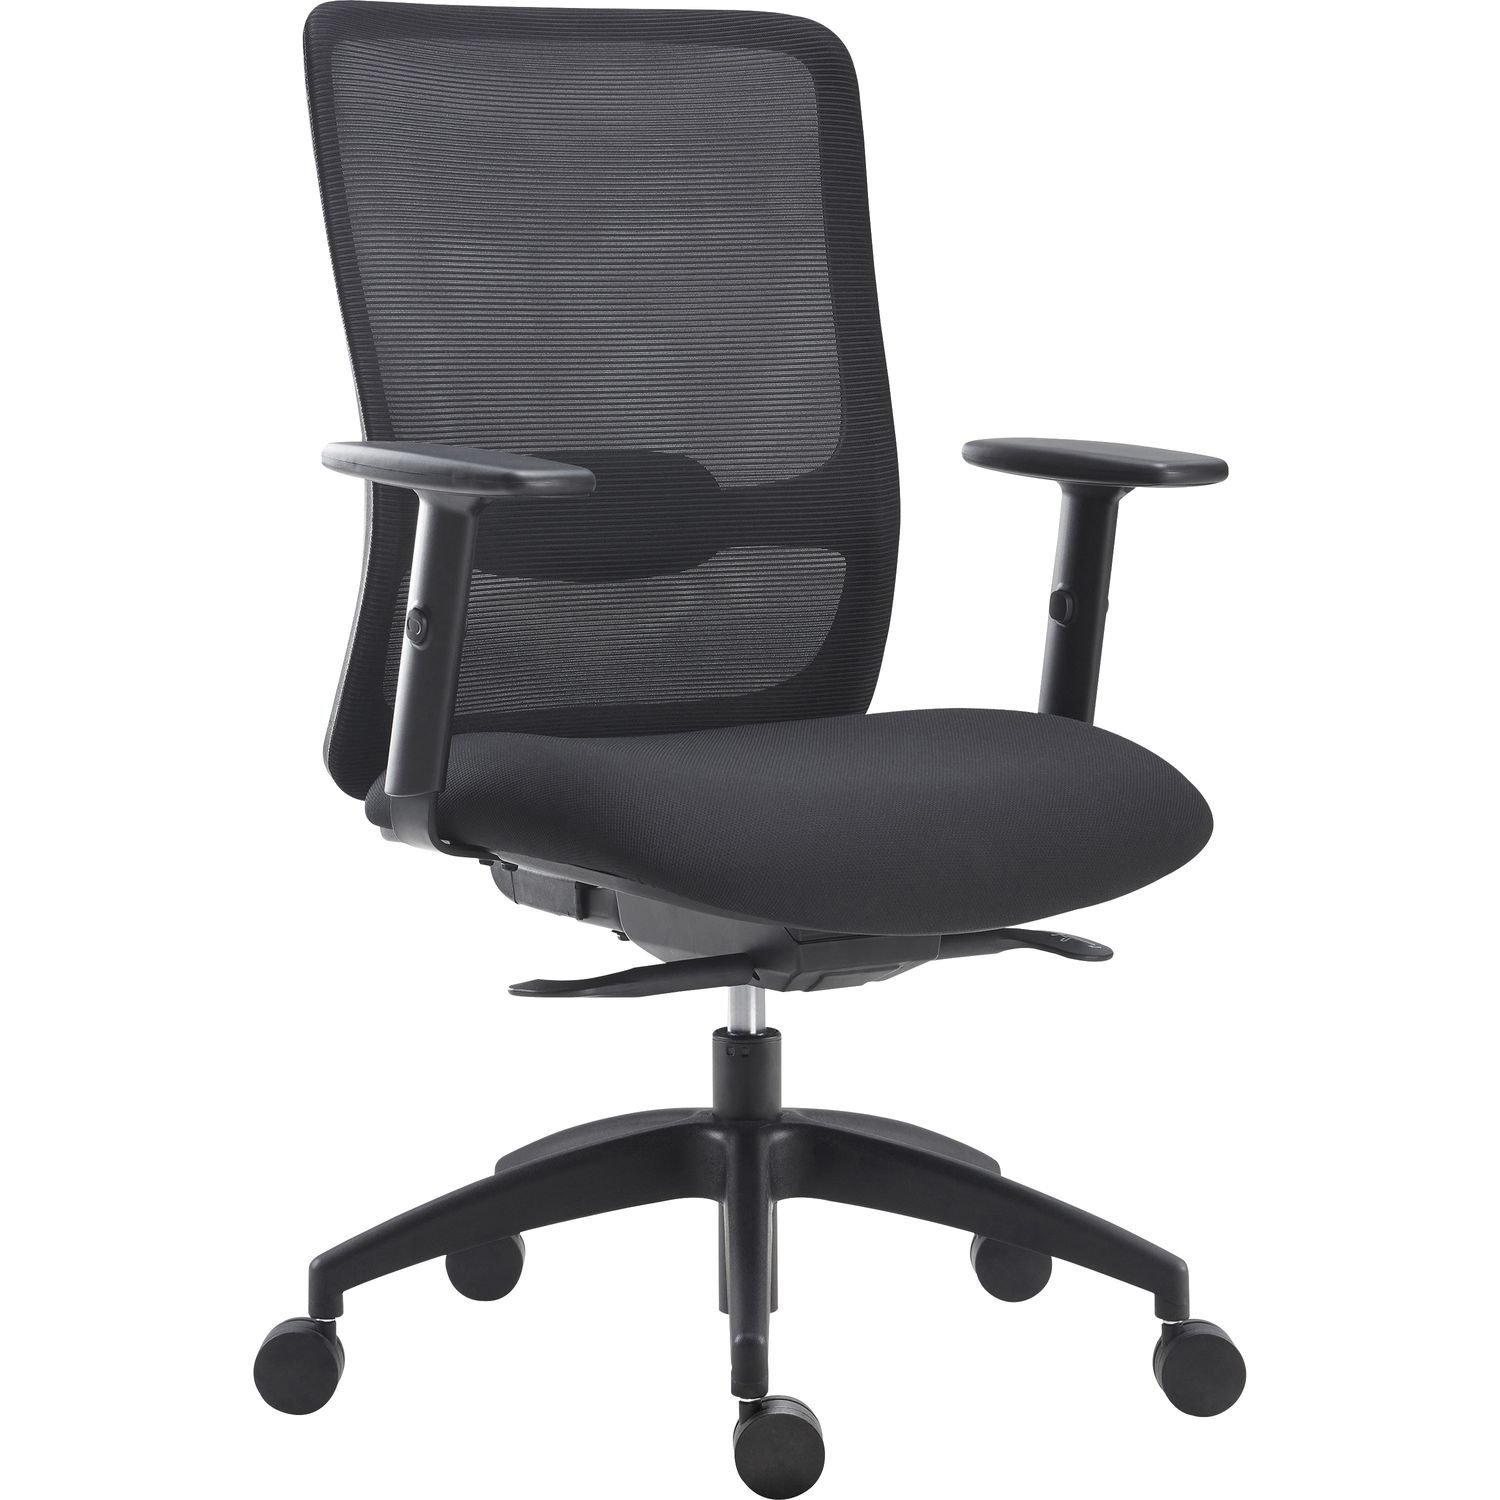 SOHO Collection High-back Chair 26.4" x 24.4" x 42.1", Material: Fabric Seat, Nylon Base, Finish: Black, Gray